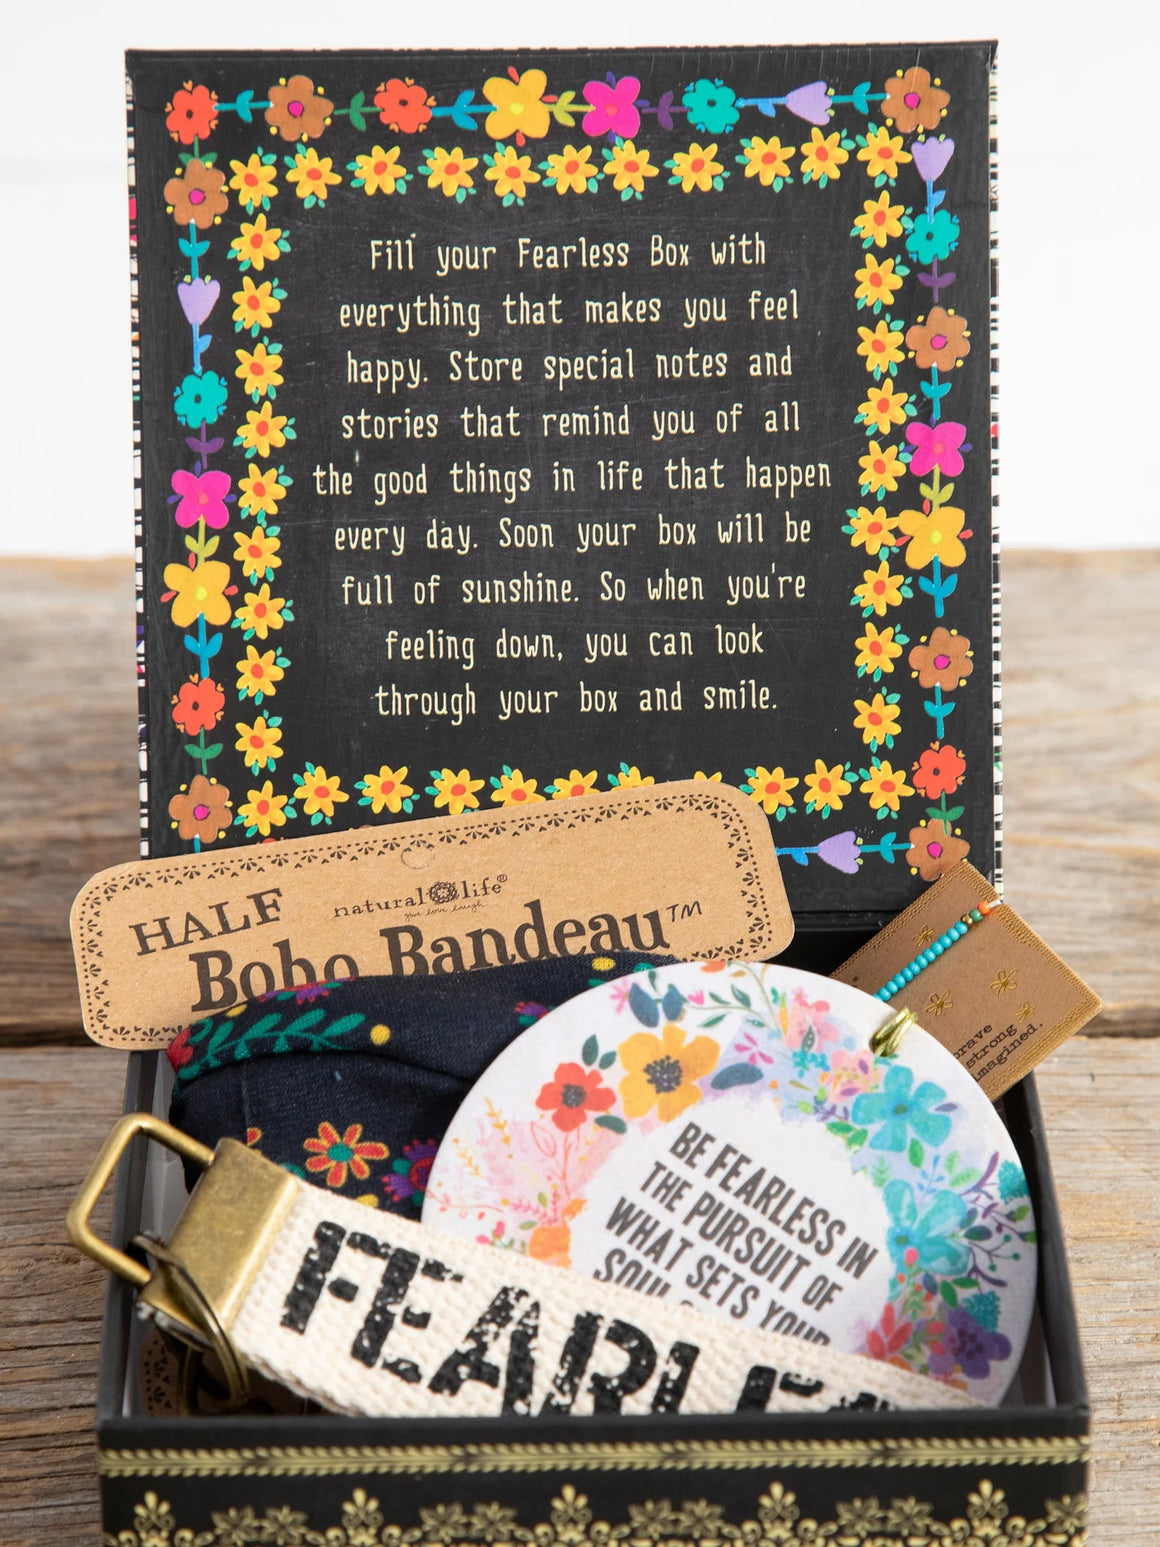 Happy Box Gift Set - Fearless